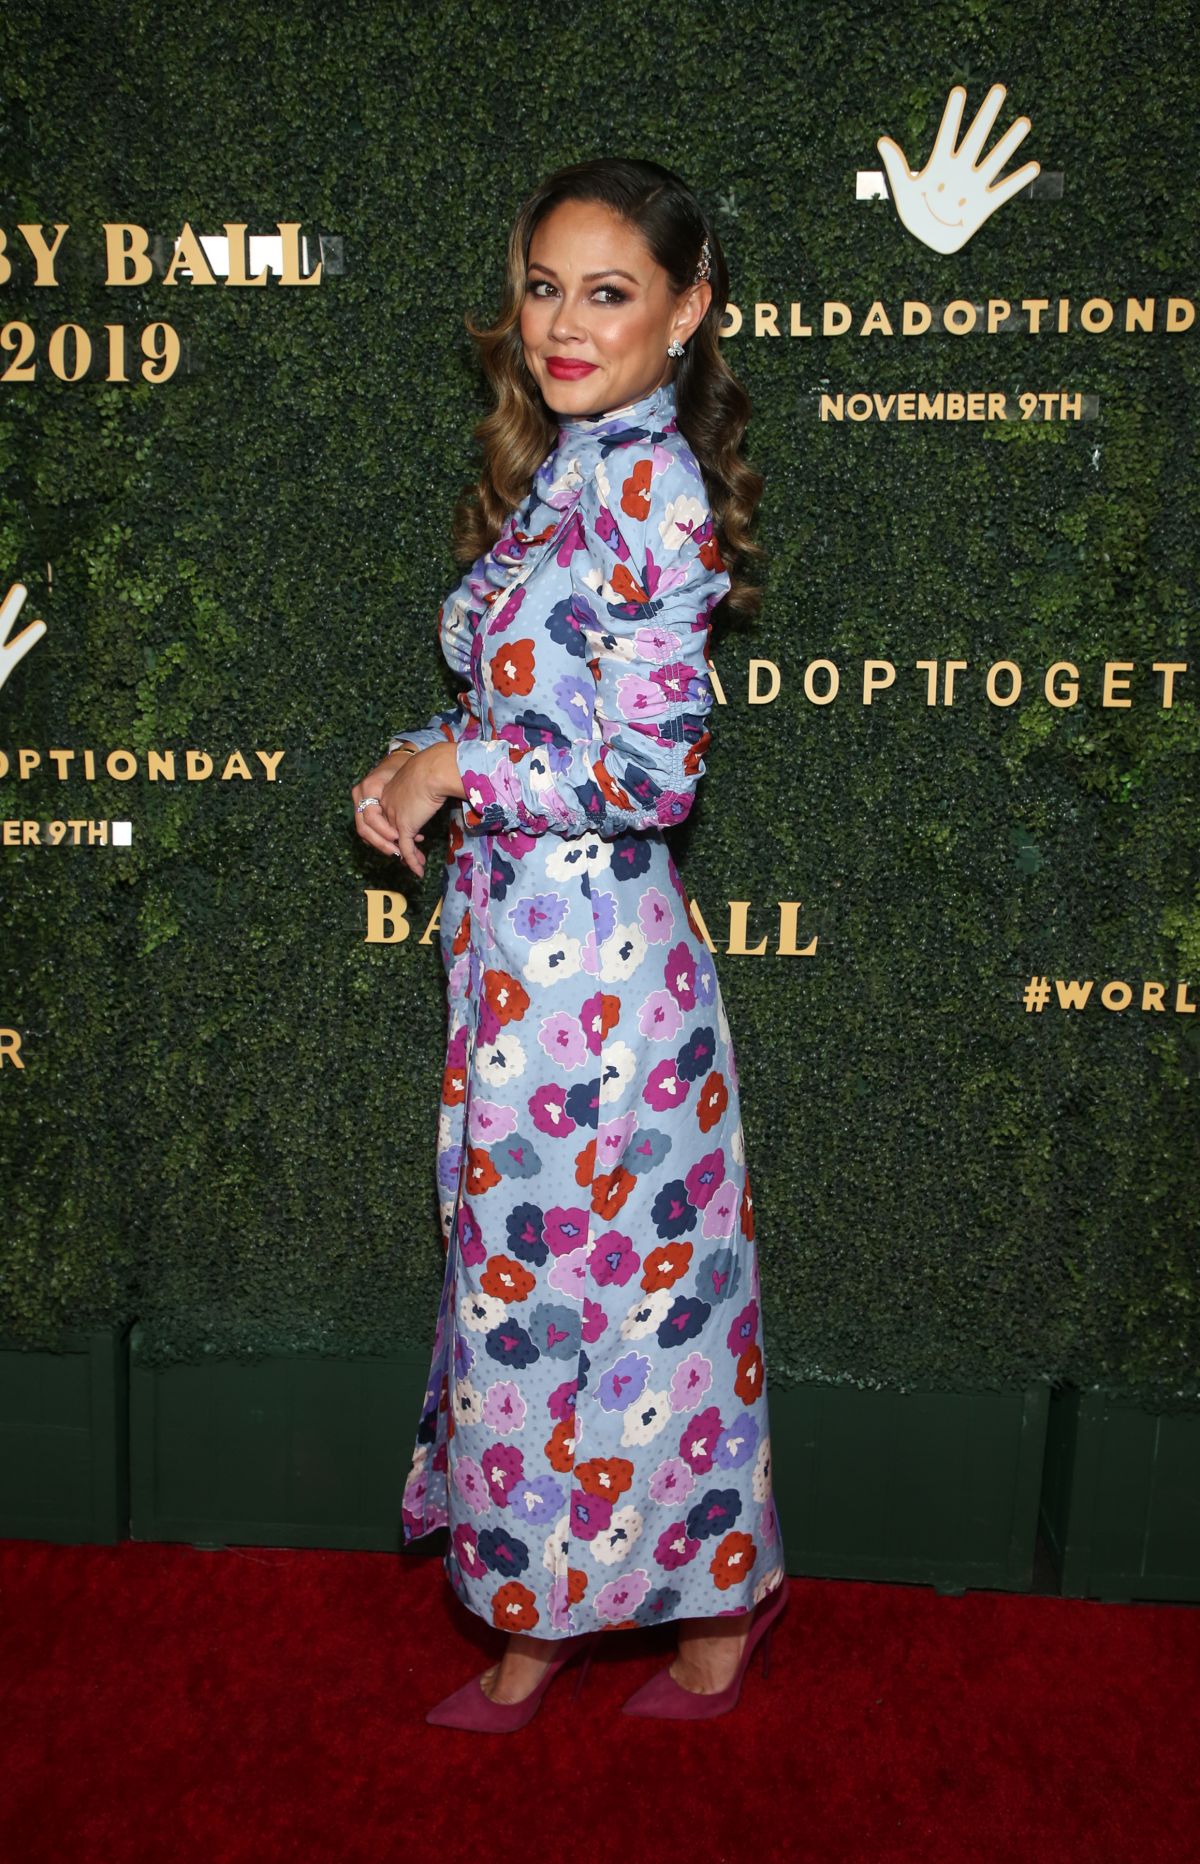 VANESSA MINNILLO at 5th Annual Baby Ball in Los Angeles 10/12/2019 ...